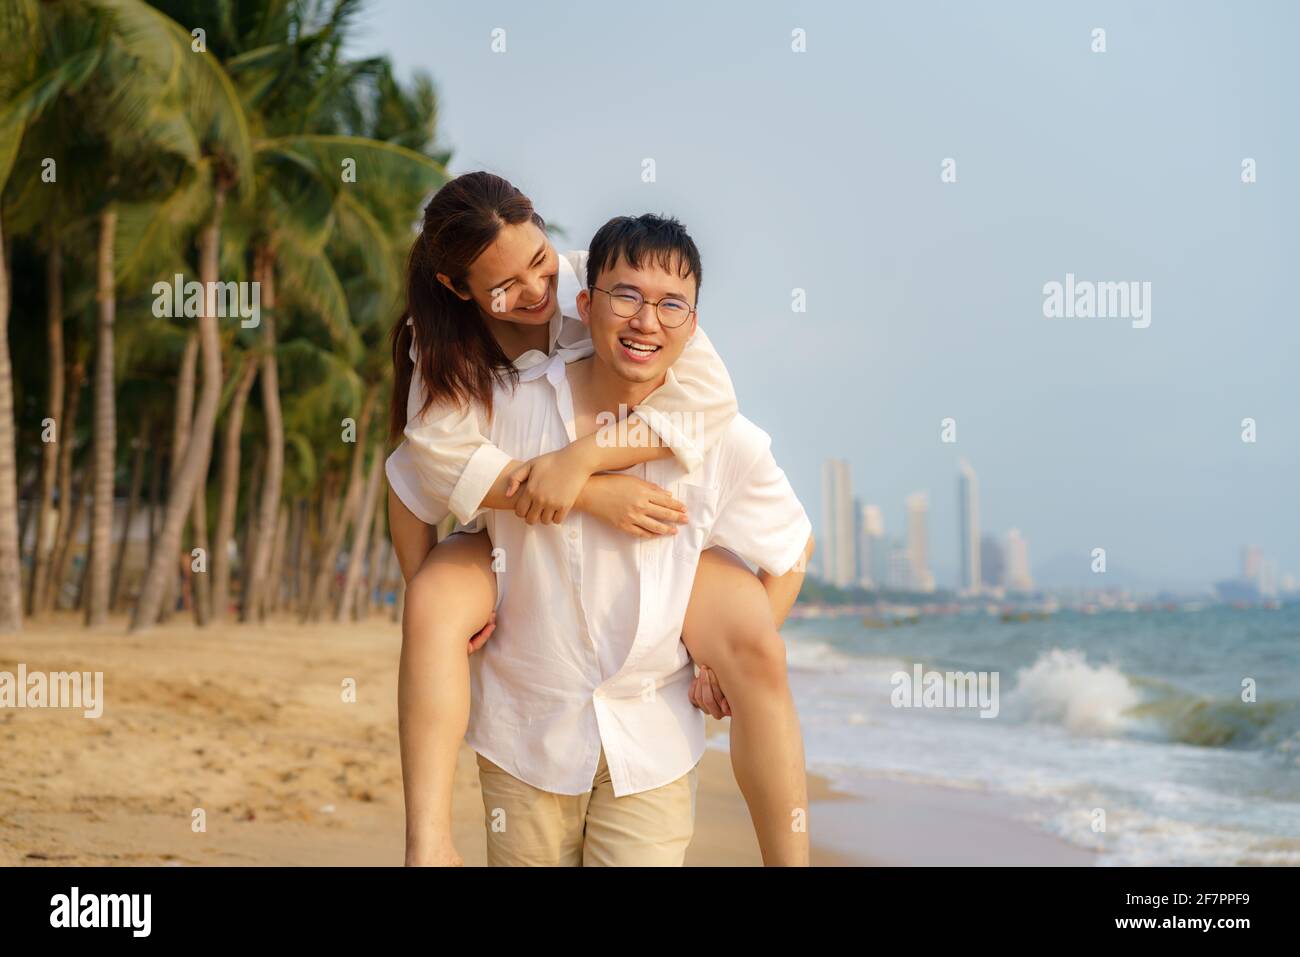 Asian man carry her girlfriend on his back and have fun on a beach with coconut palms while relaxing on a summer vacation. Stock Photo